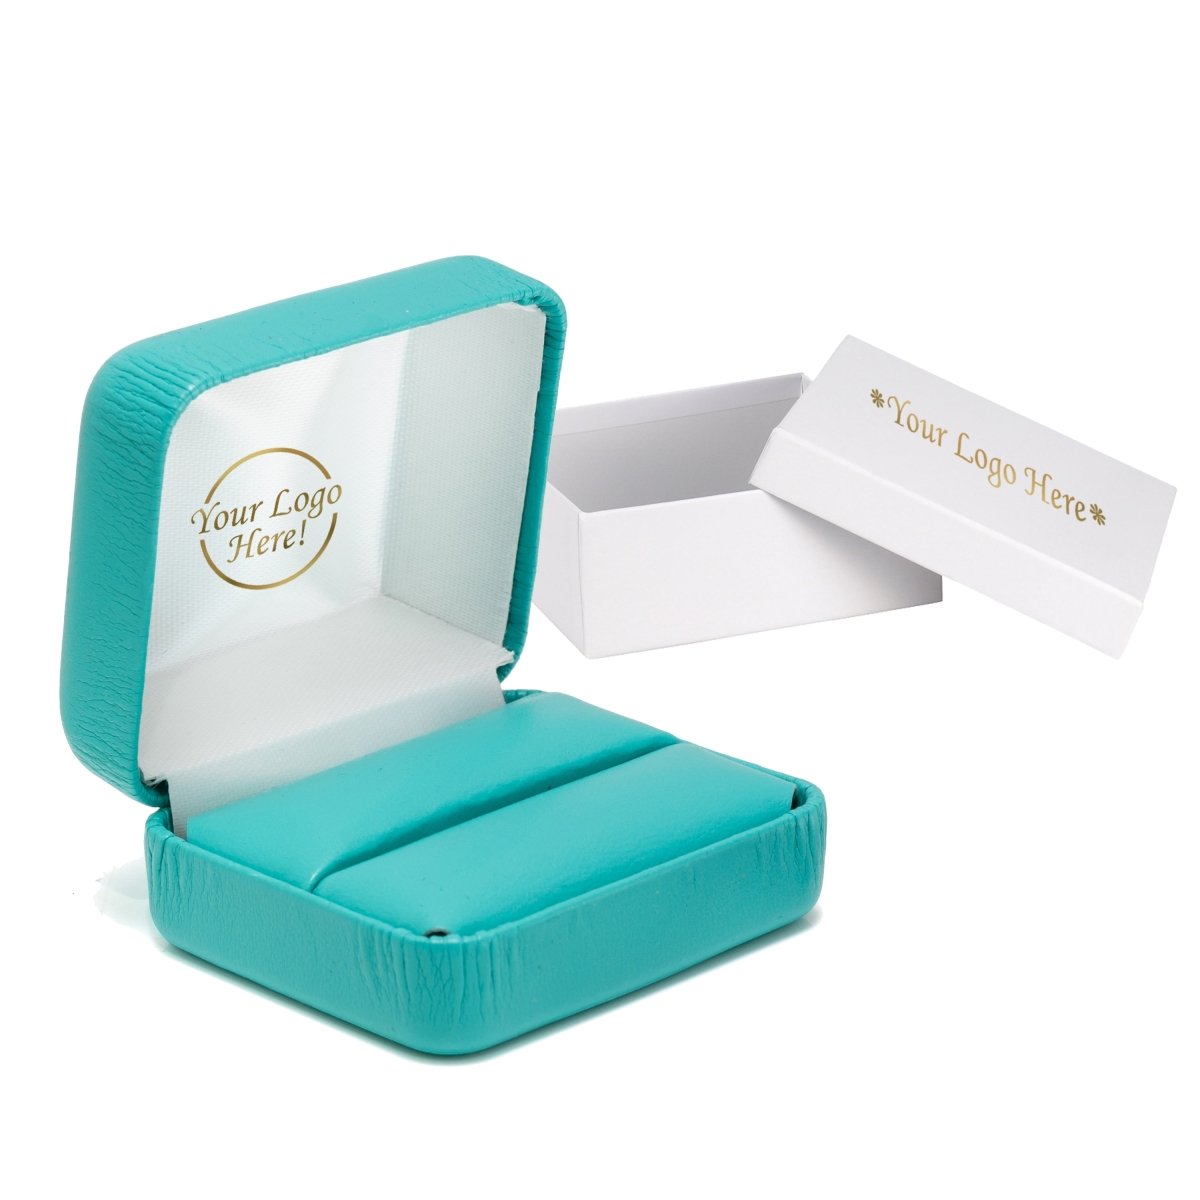 Vibrant Leatherette Double Ring Box - Prestige and Fancy - Turquoise Leatherette